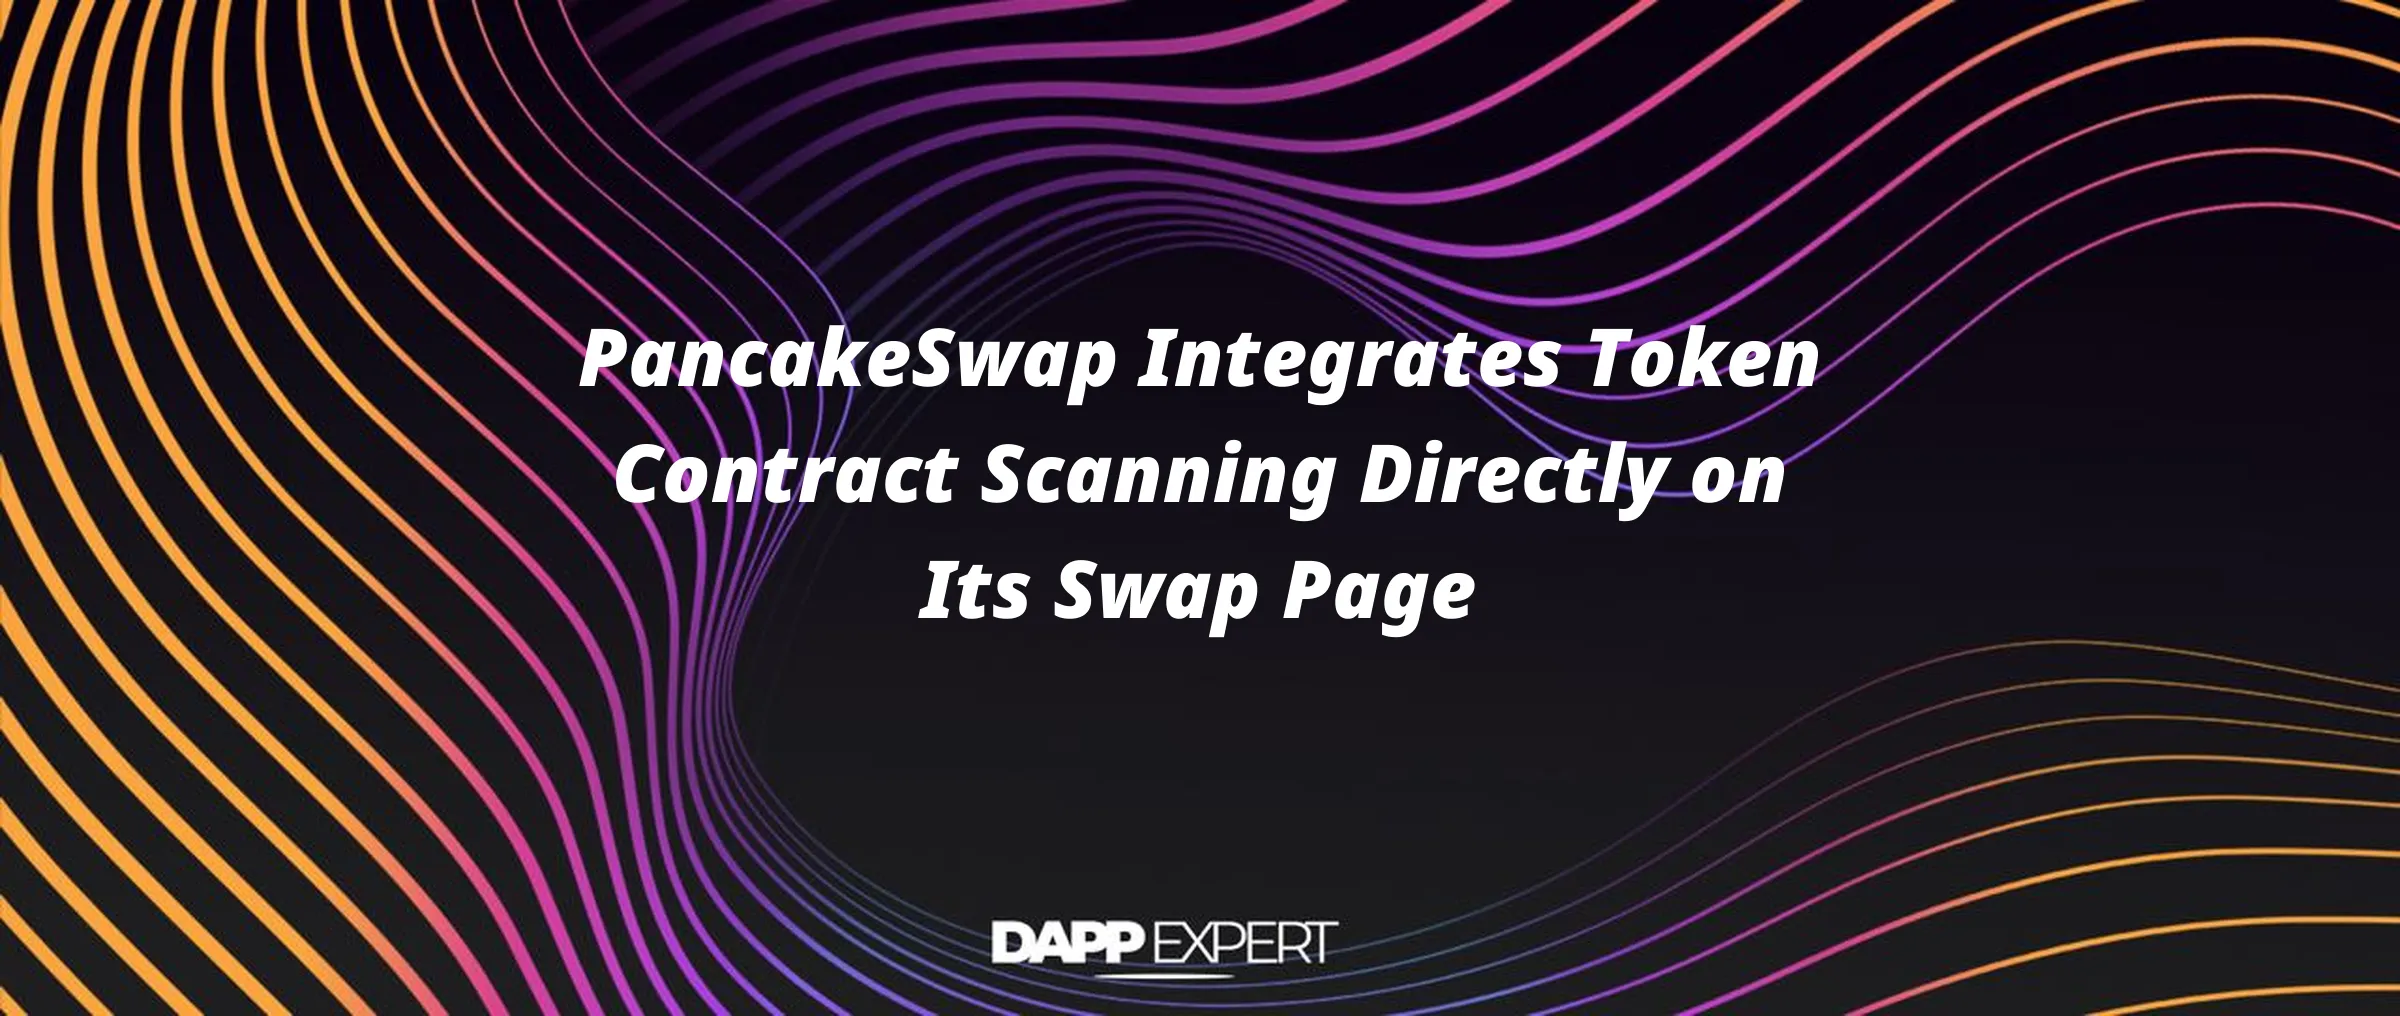 PancakeSwap Integrates Token Contract Scanning Directly on Its Swap Page